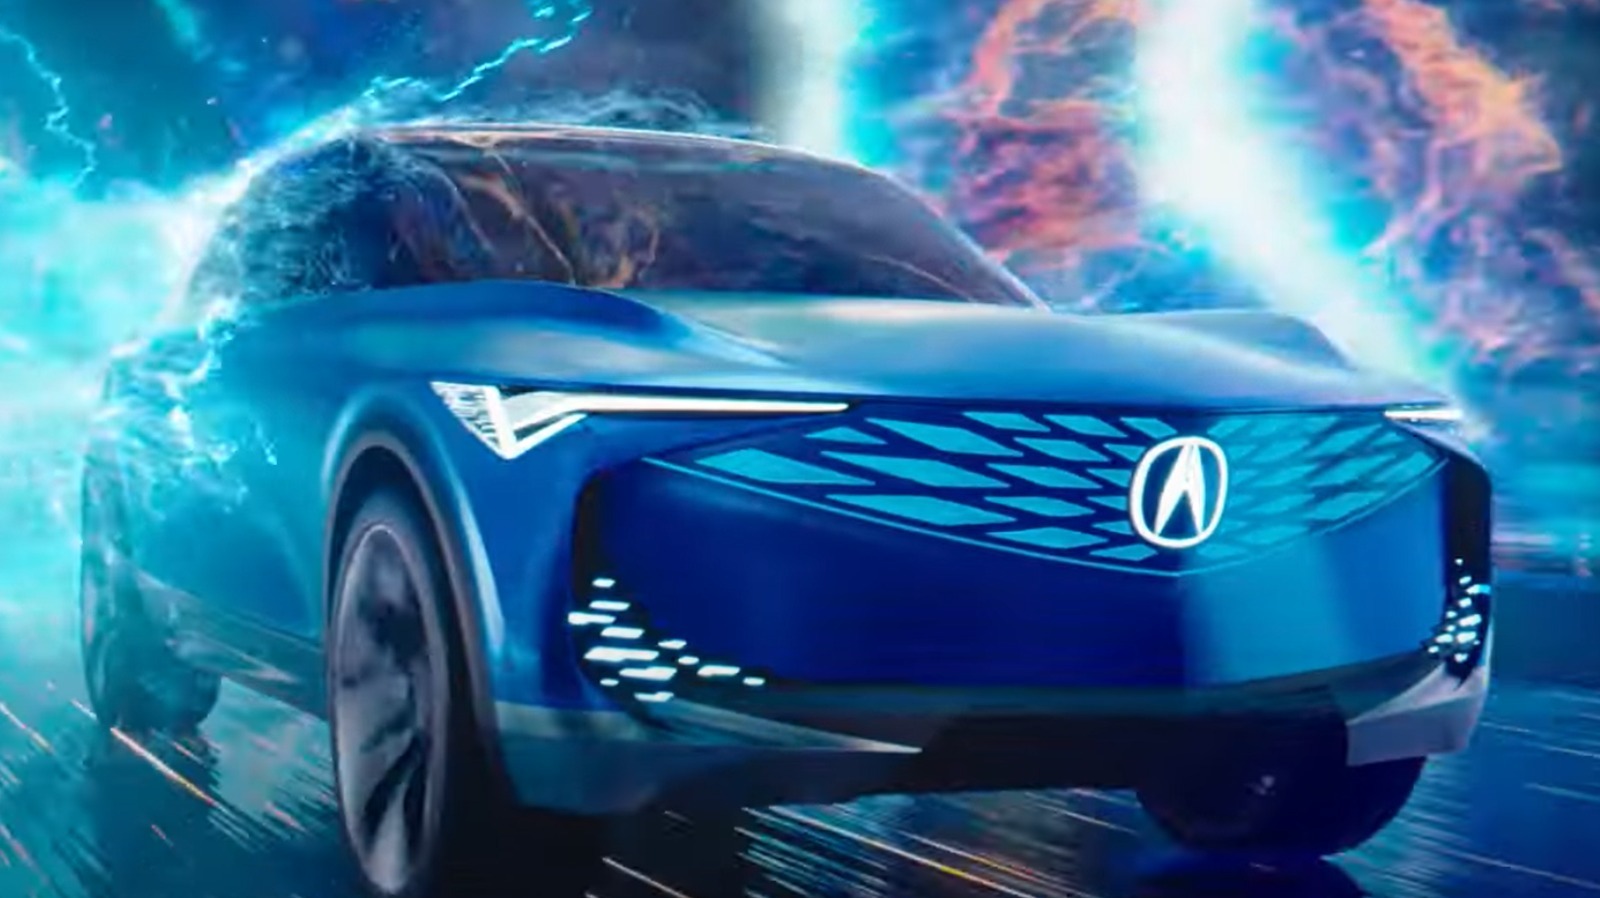 What Is The Song In The Acura Electric New World, Same Energy, Commercial?